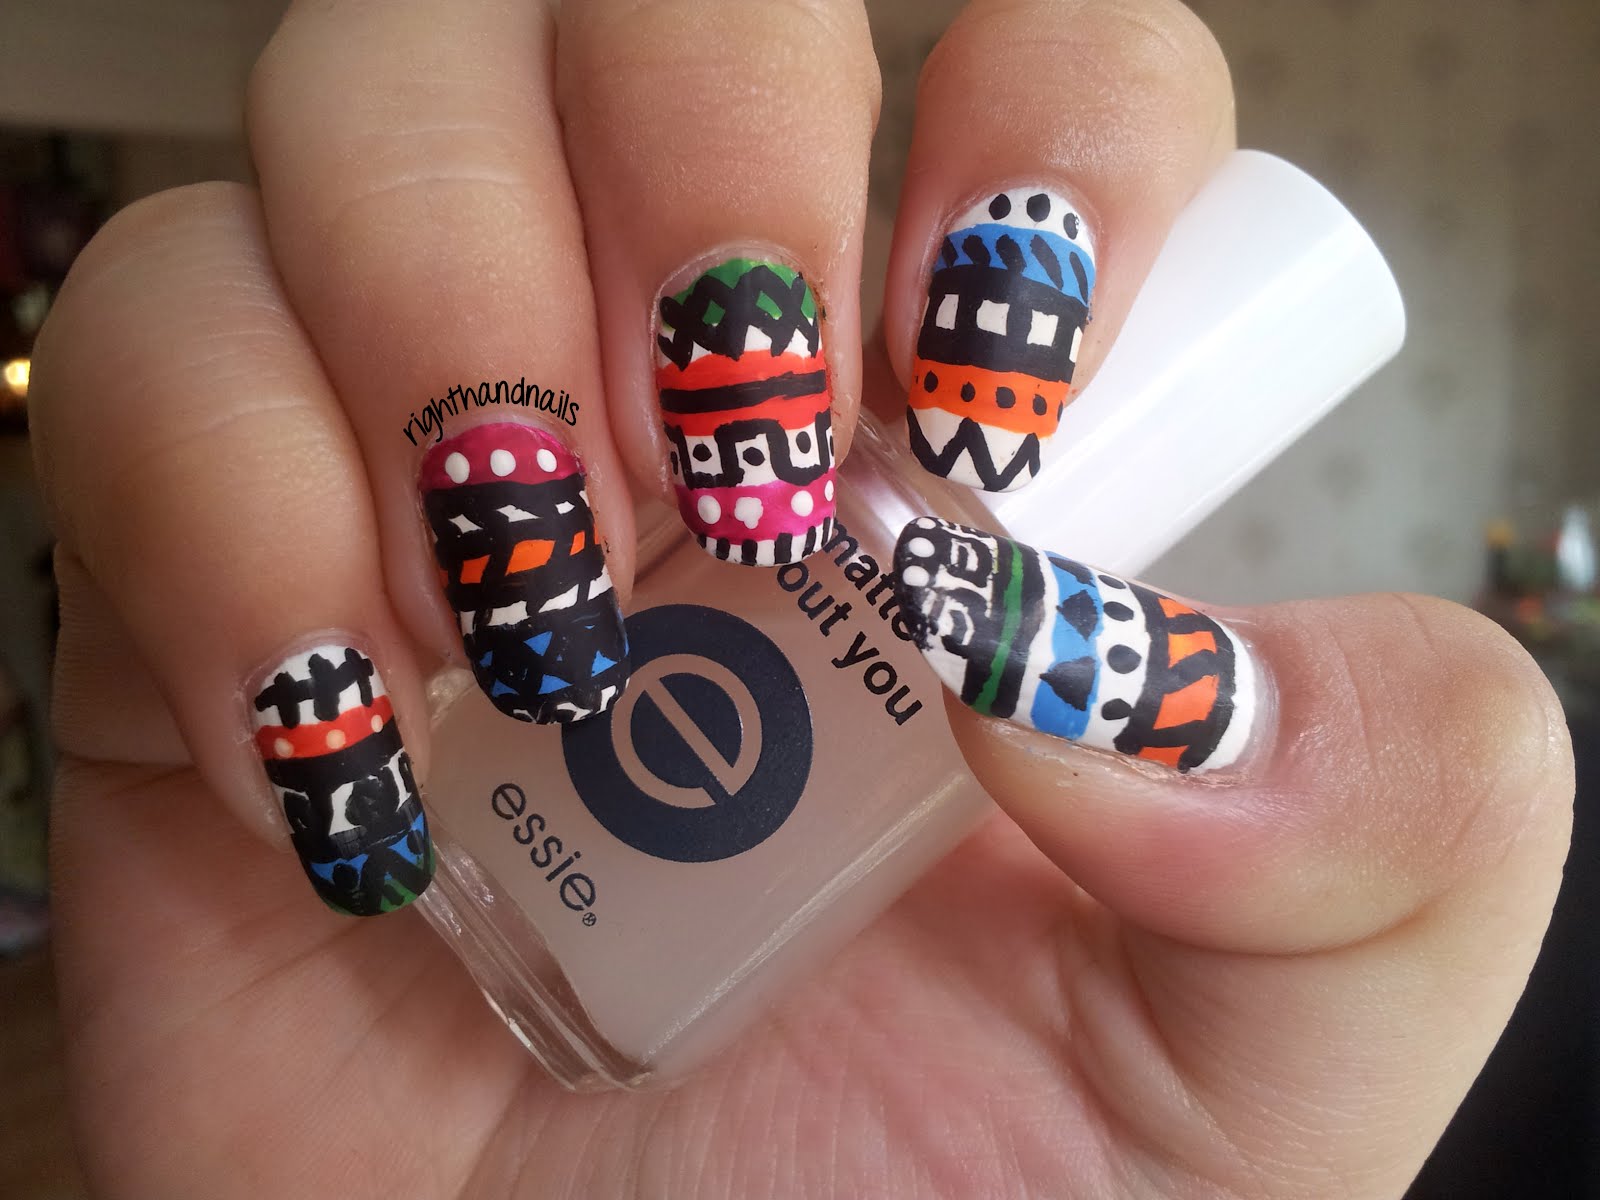 4. "Tribal Nail Art Tutorial with Dotting Tool" - wide 3